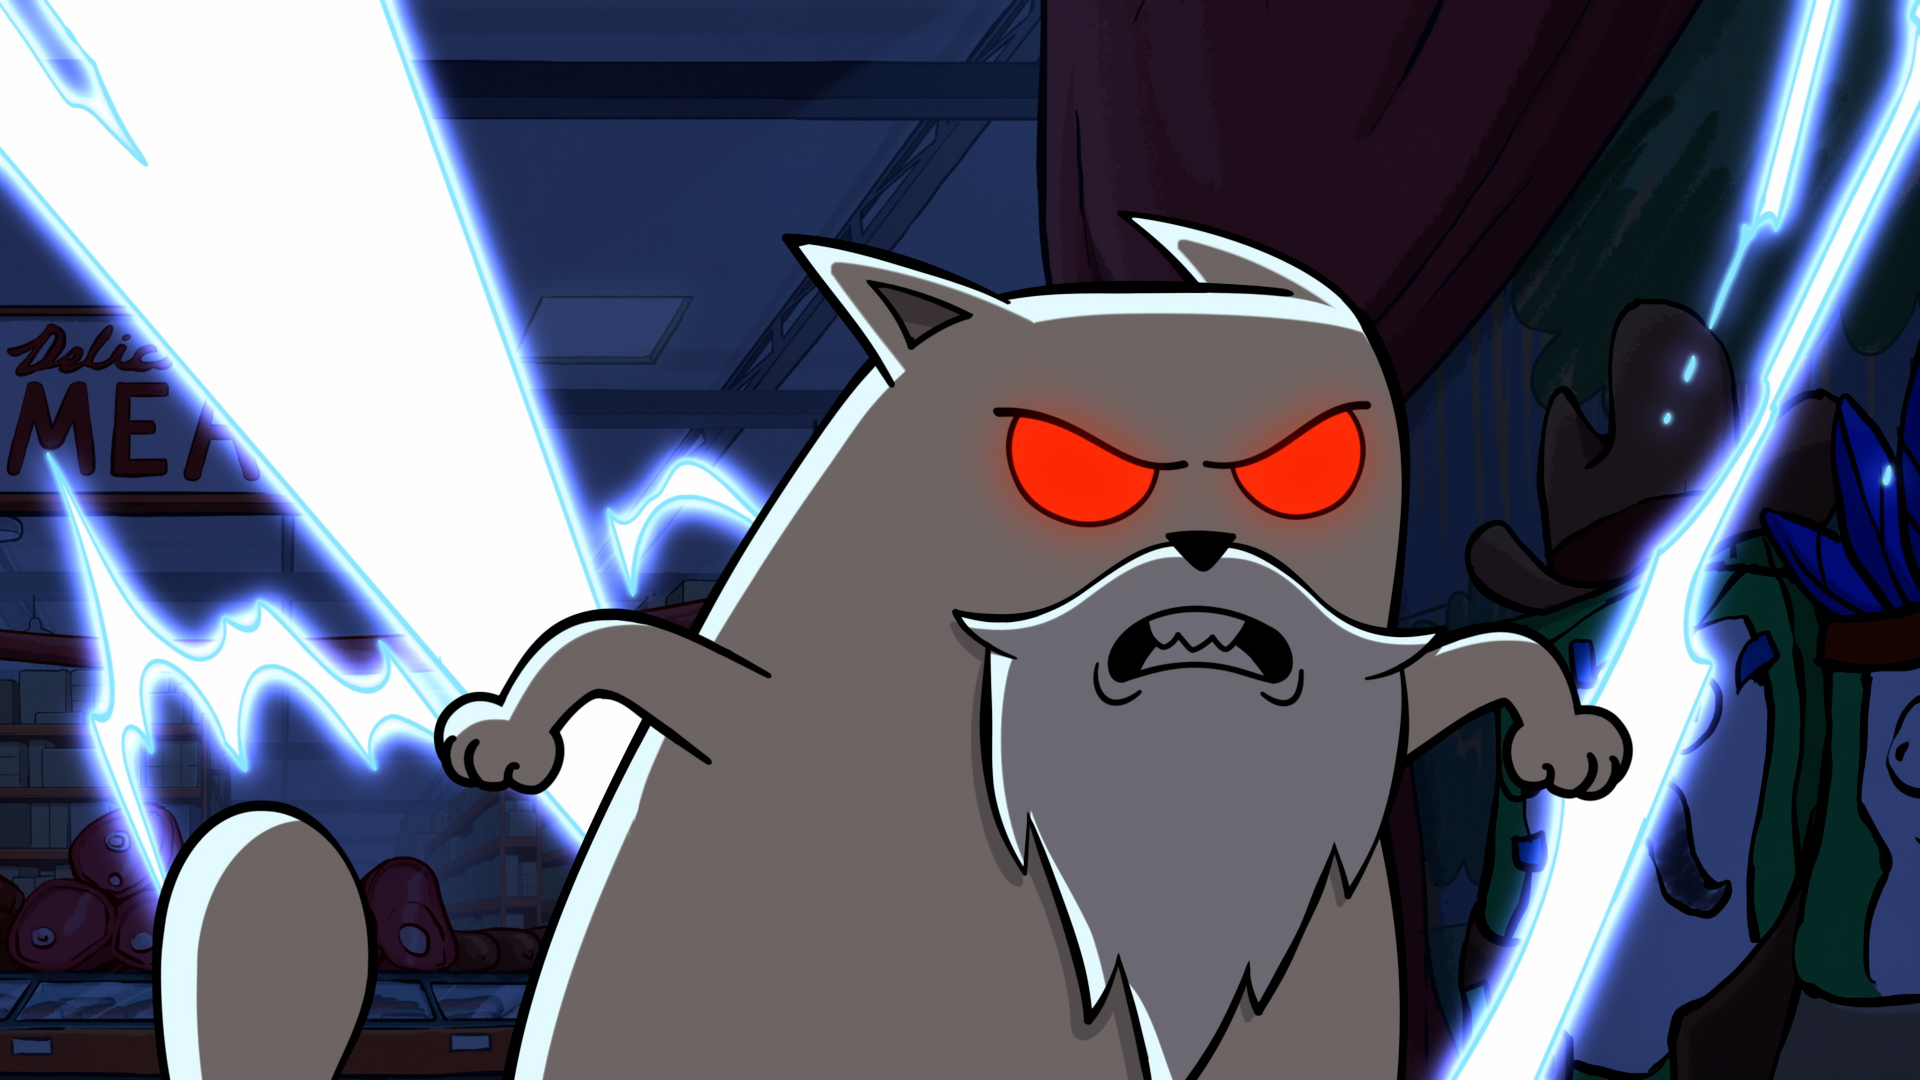 An animated angry white cat with glowing red eyes in a still from Exploding Kittens